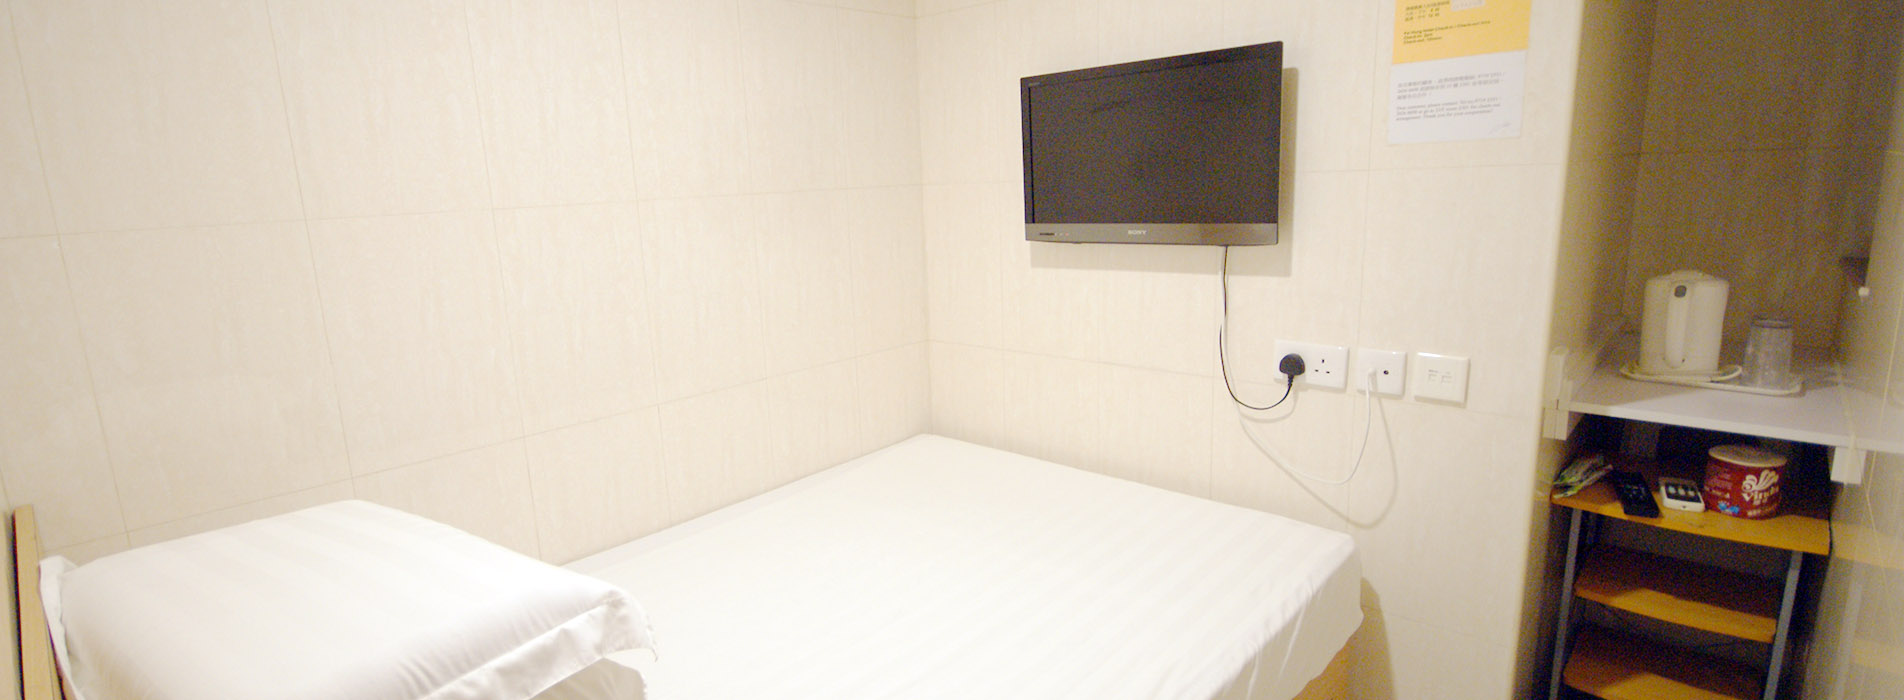 Hei Hung Hotel Deluxe Ensuite Room